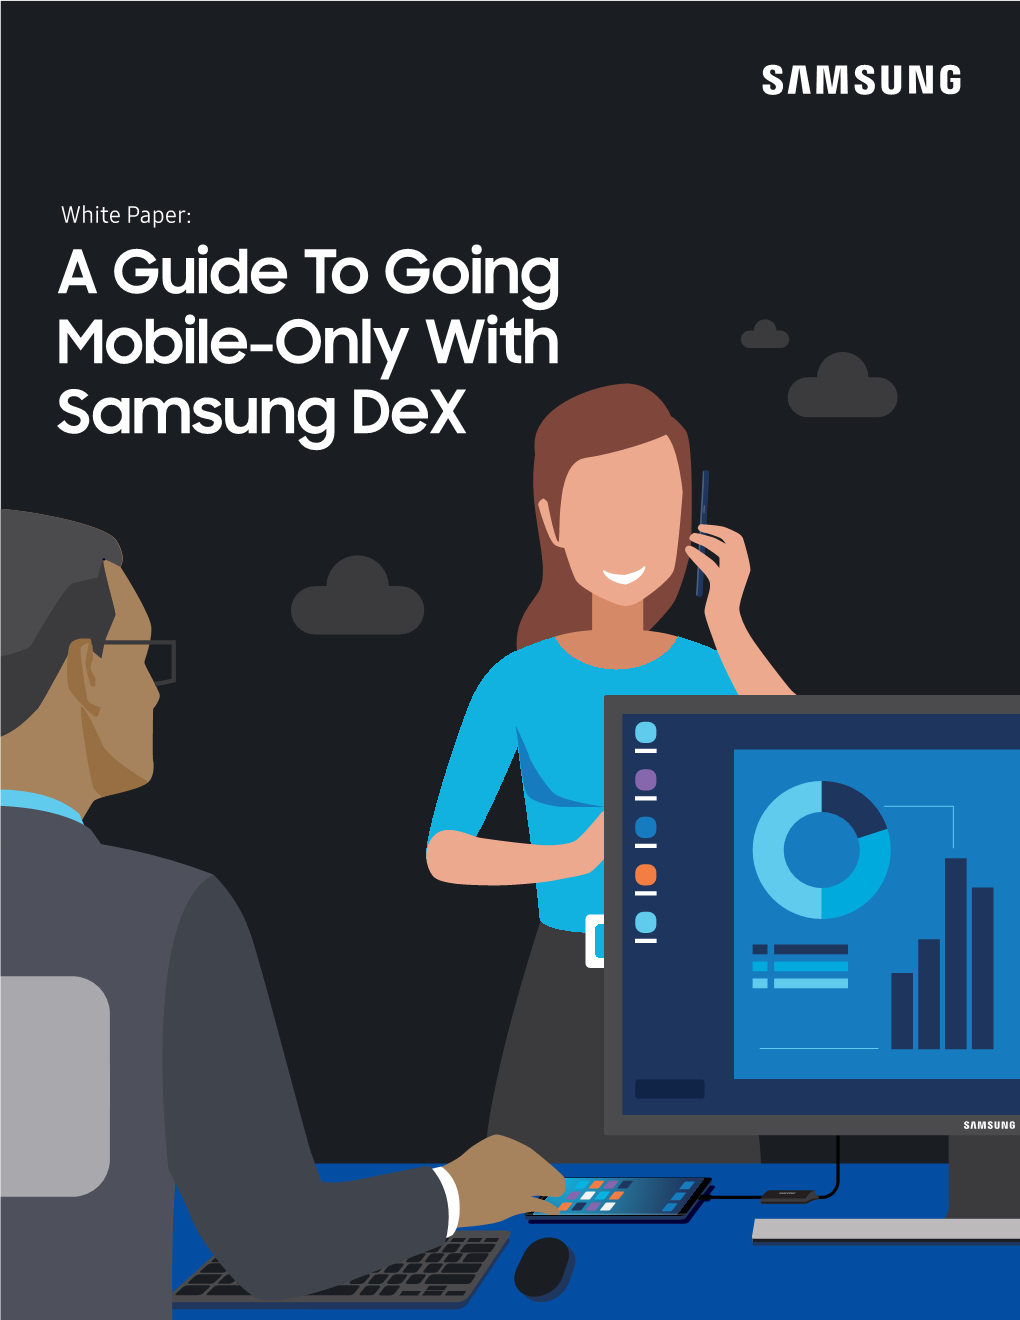 White Paper: a Guide to Going Mobile-Only with Samsung Dex White Paper: a Guide to Going Mobile-Only with Samsung Dex 2